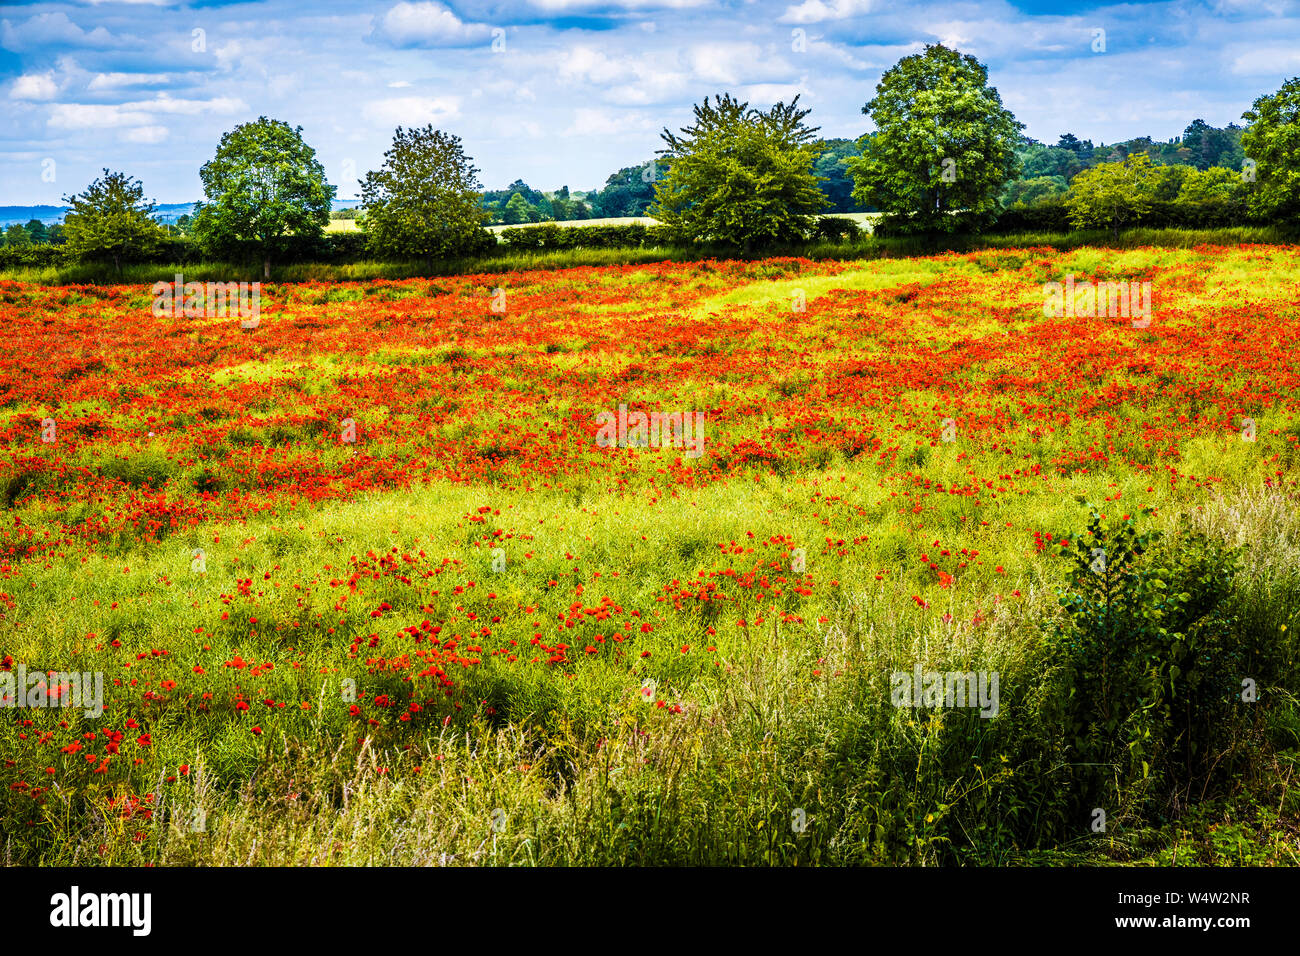 A field of red poppies (Papaver rhoeas) in the summer countryside in Oxfordshire. Stock Photo